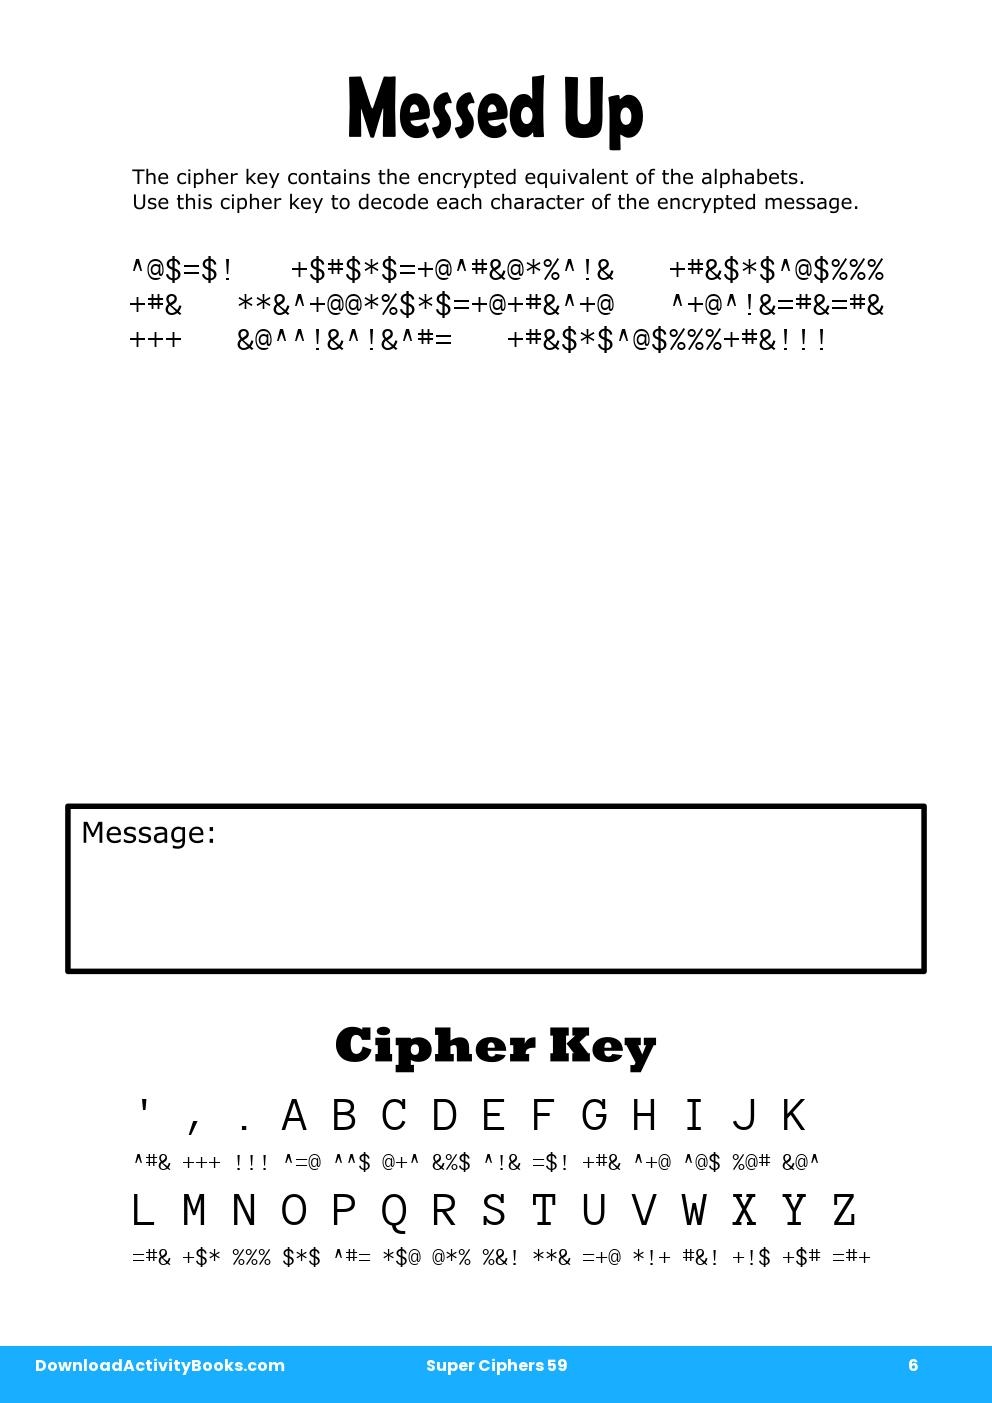 Messed Up in Super Ciphers 59